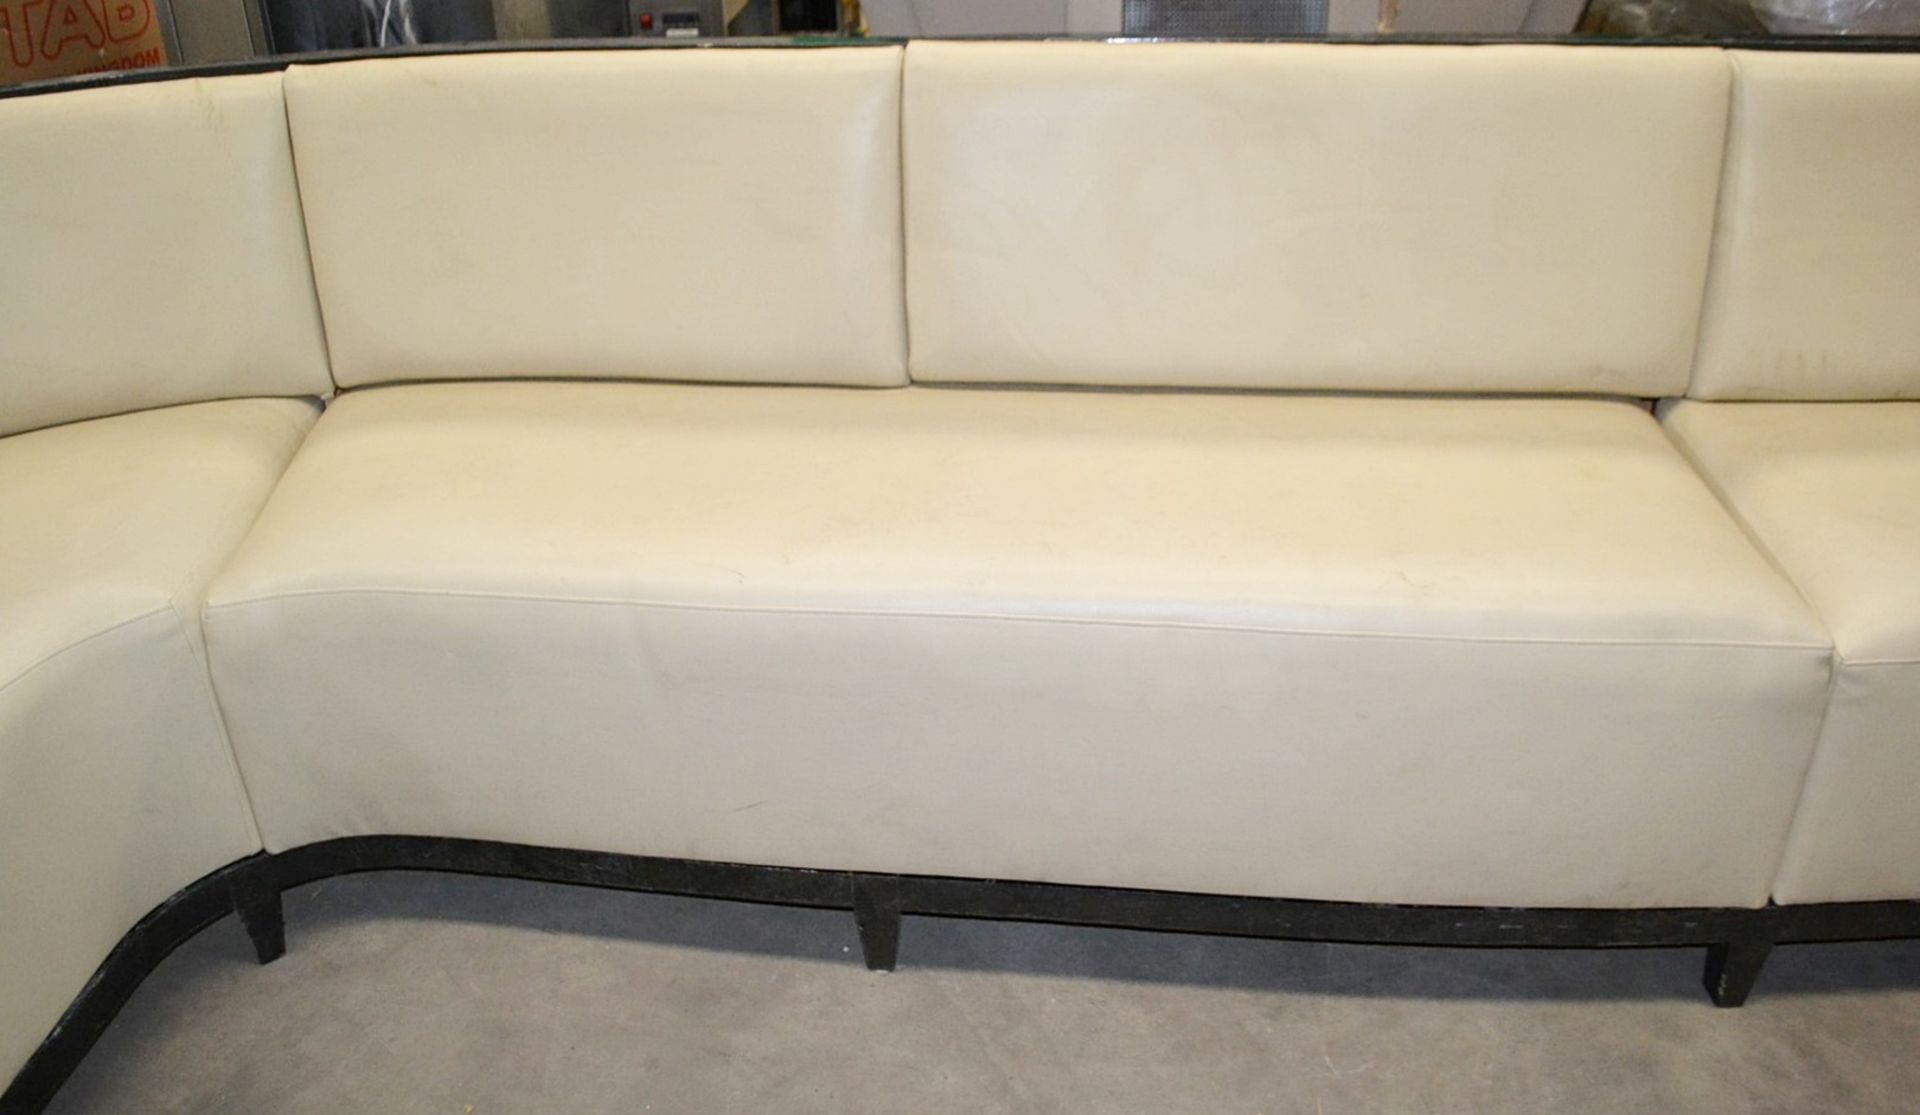 5 x Assorted Sections Of Curved Commercial Seating Upholstered In A Cream Faux Leather - Image 18 of 23